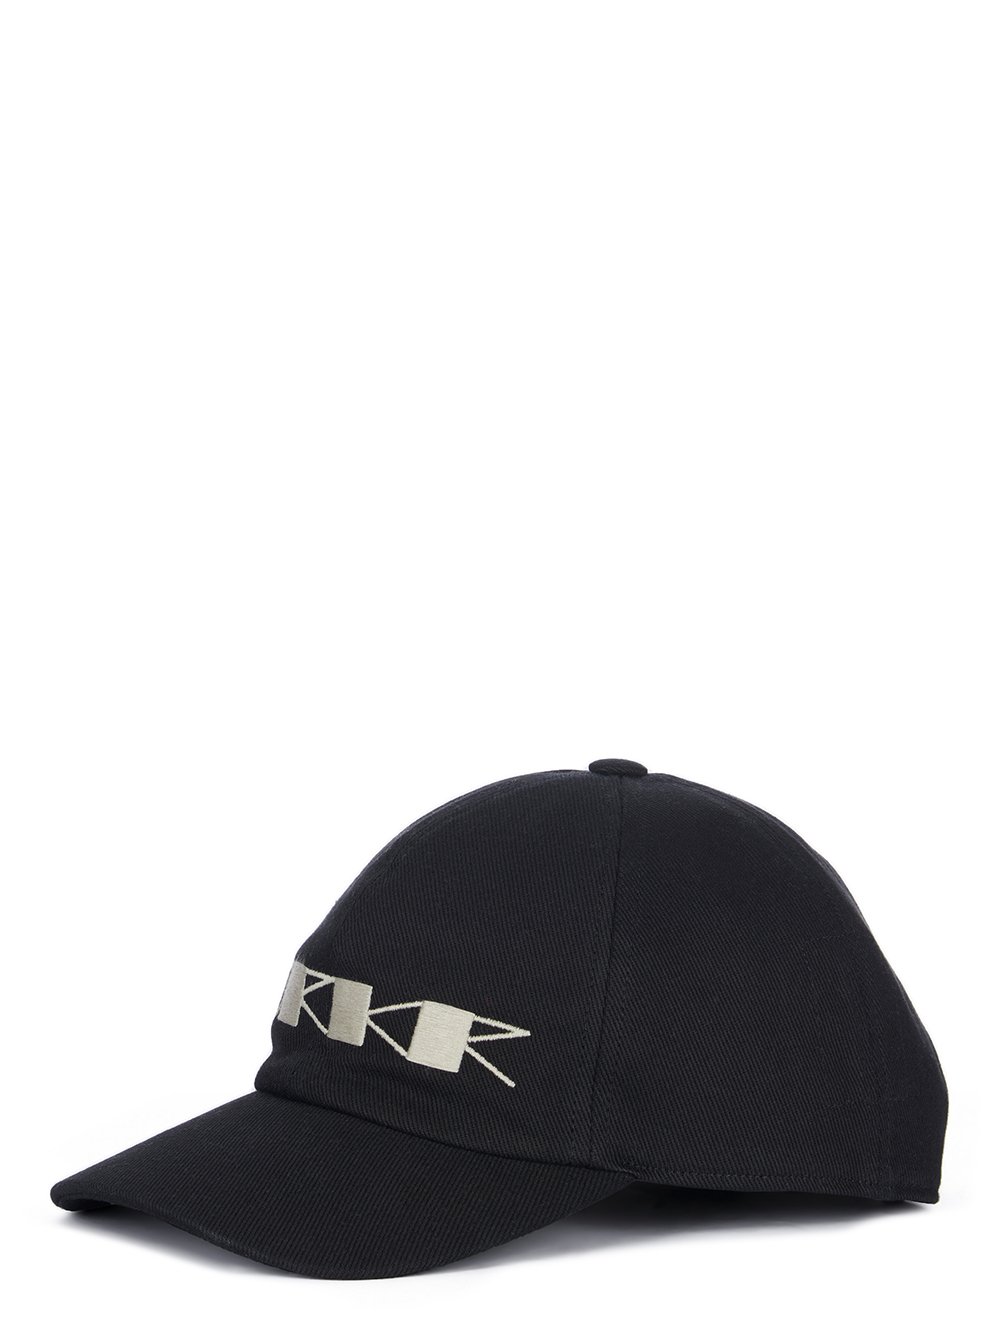 RICK OWENS FW23 LUXOR BASEBALL CAP IN BLACK AND PEARL 13OZ OVERDYED DENIM